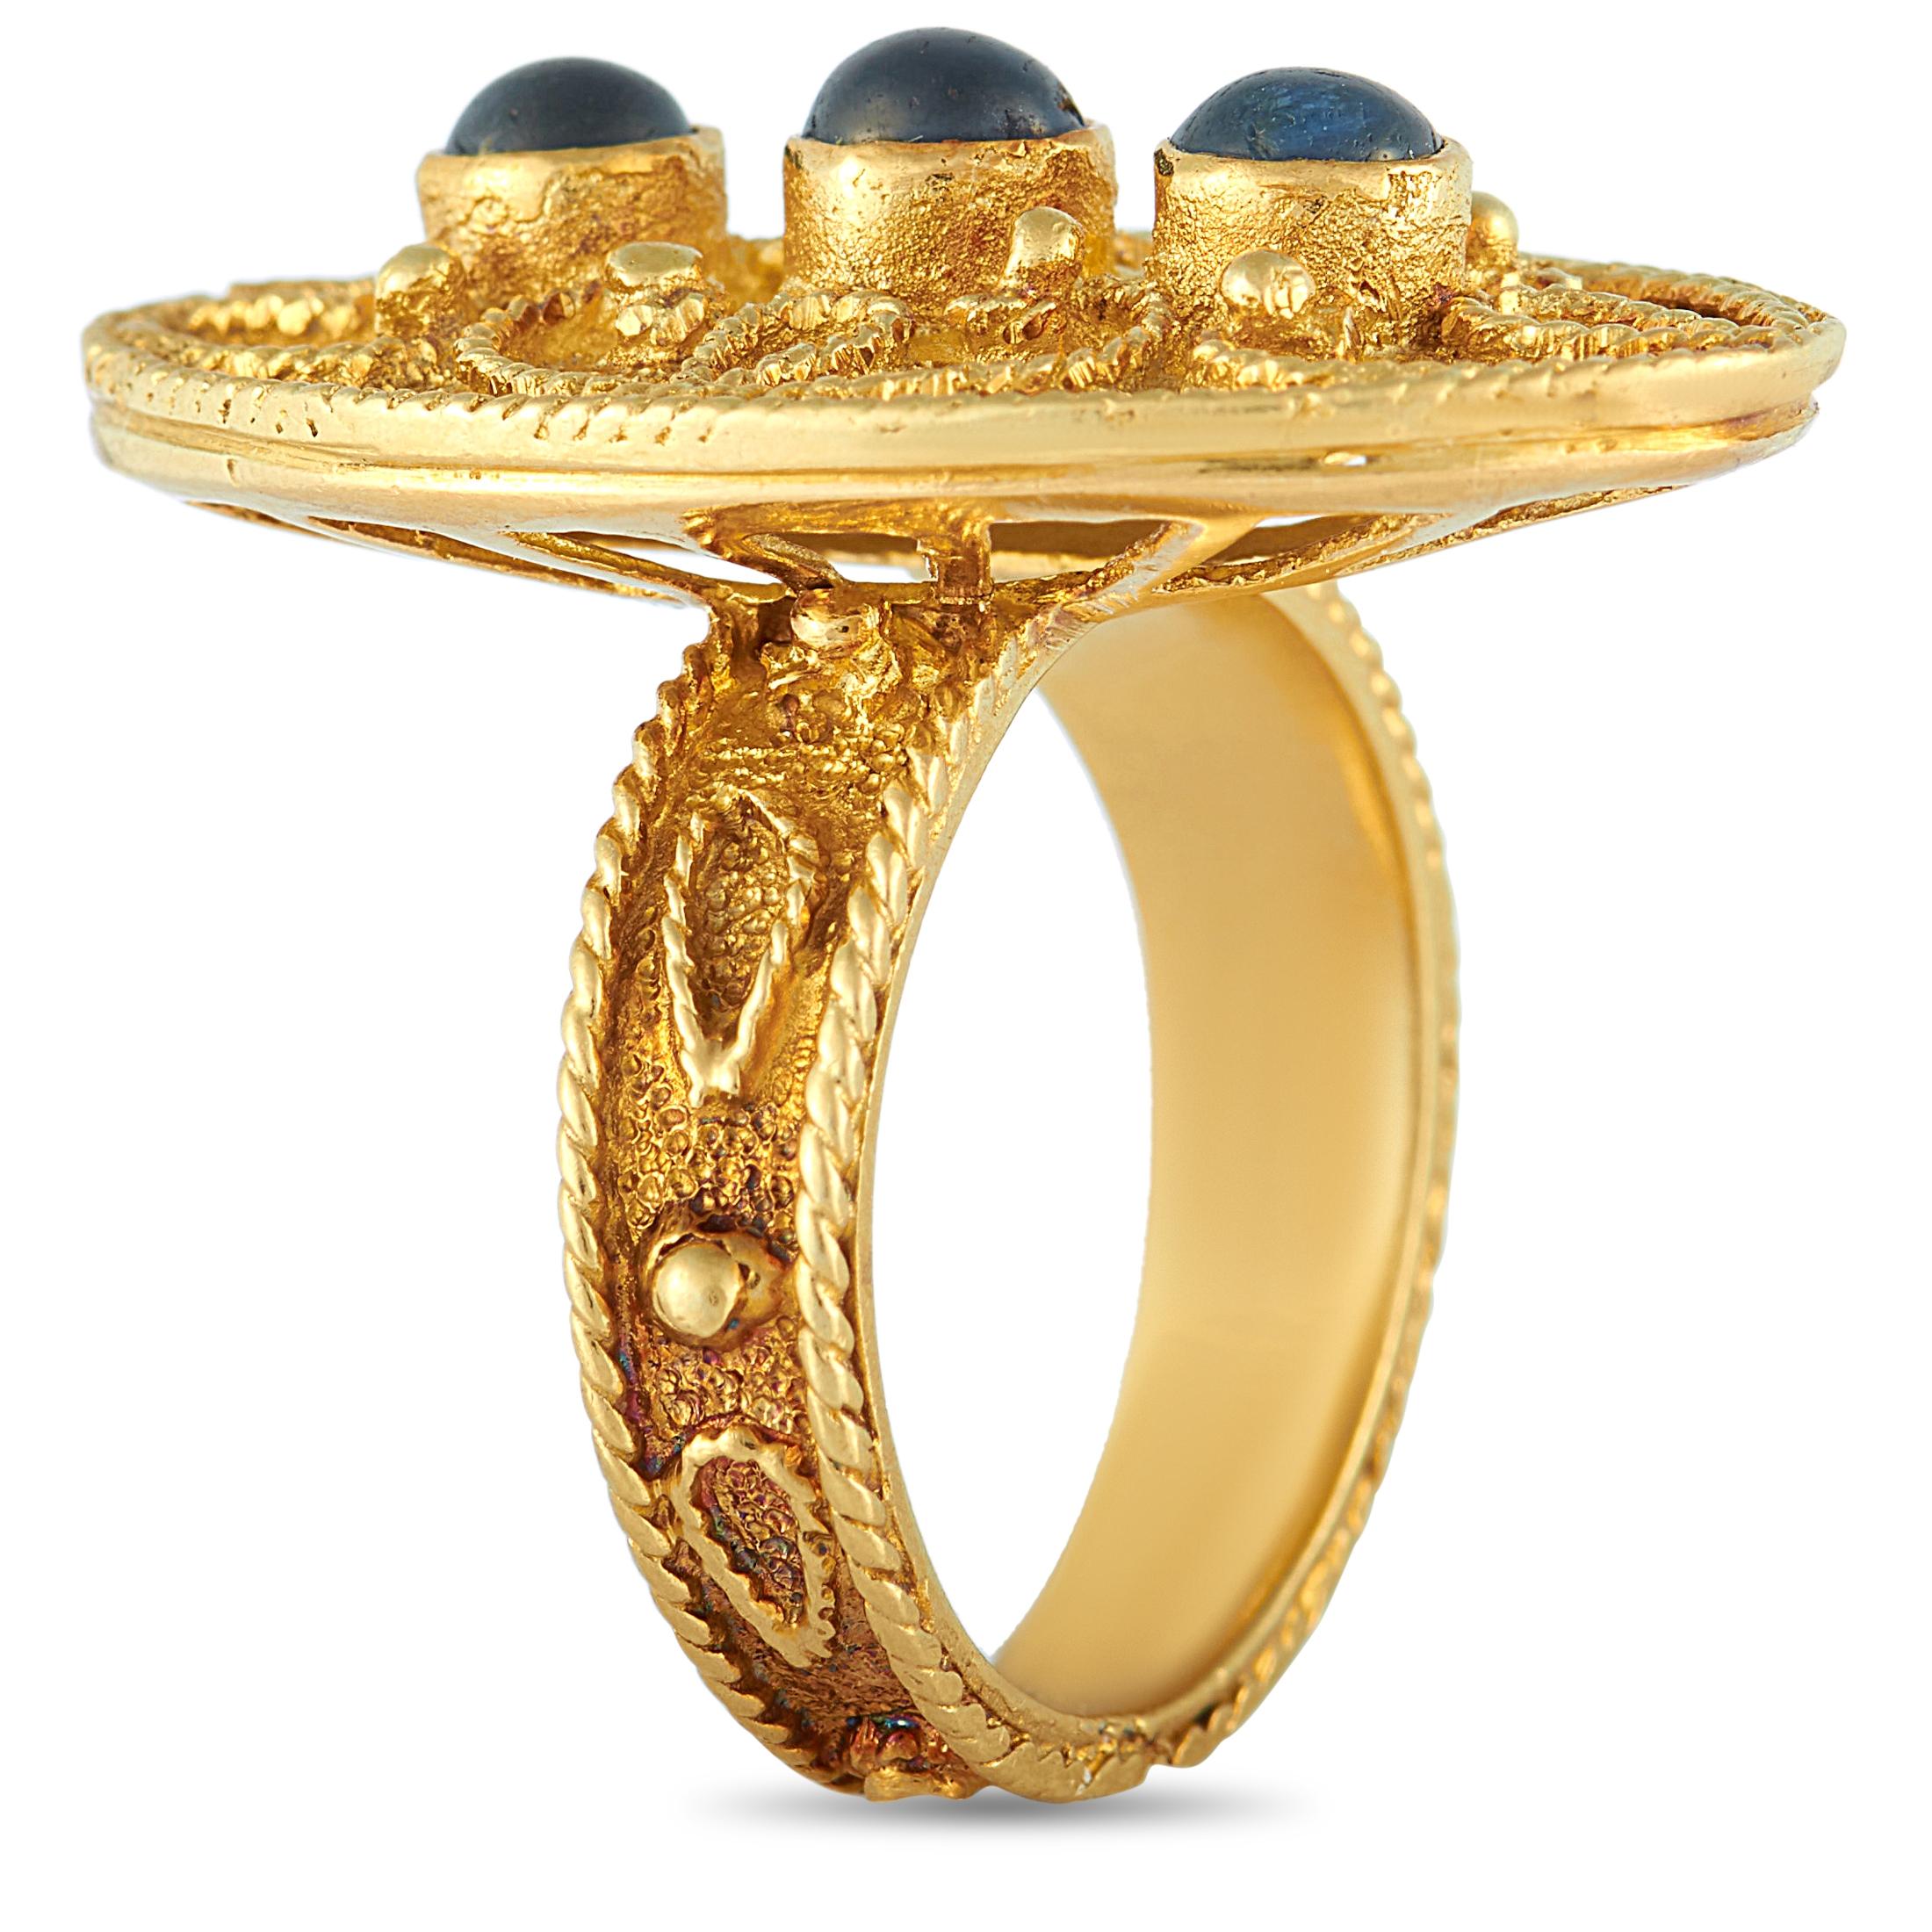 This Zolotas ring is made of 18K yellow gold and embellished wit
h sapphires. The ring weighs 12 grams and boasts band thickness of 4 mm and top height of 8 mm, while top dimensions measure 18 by 30 mm.

Offered in estate condition, this jewelry